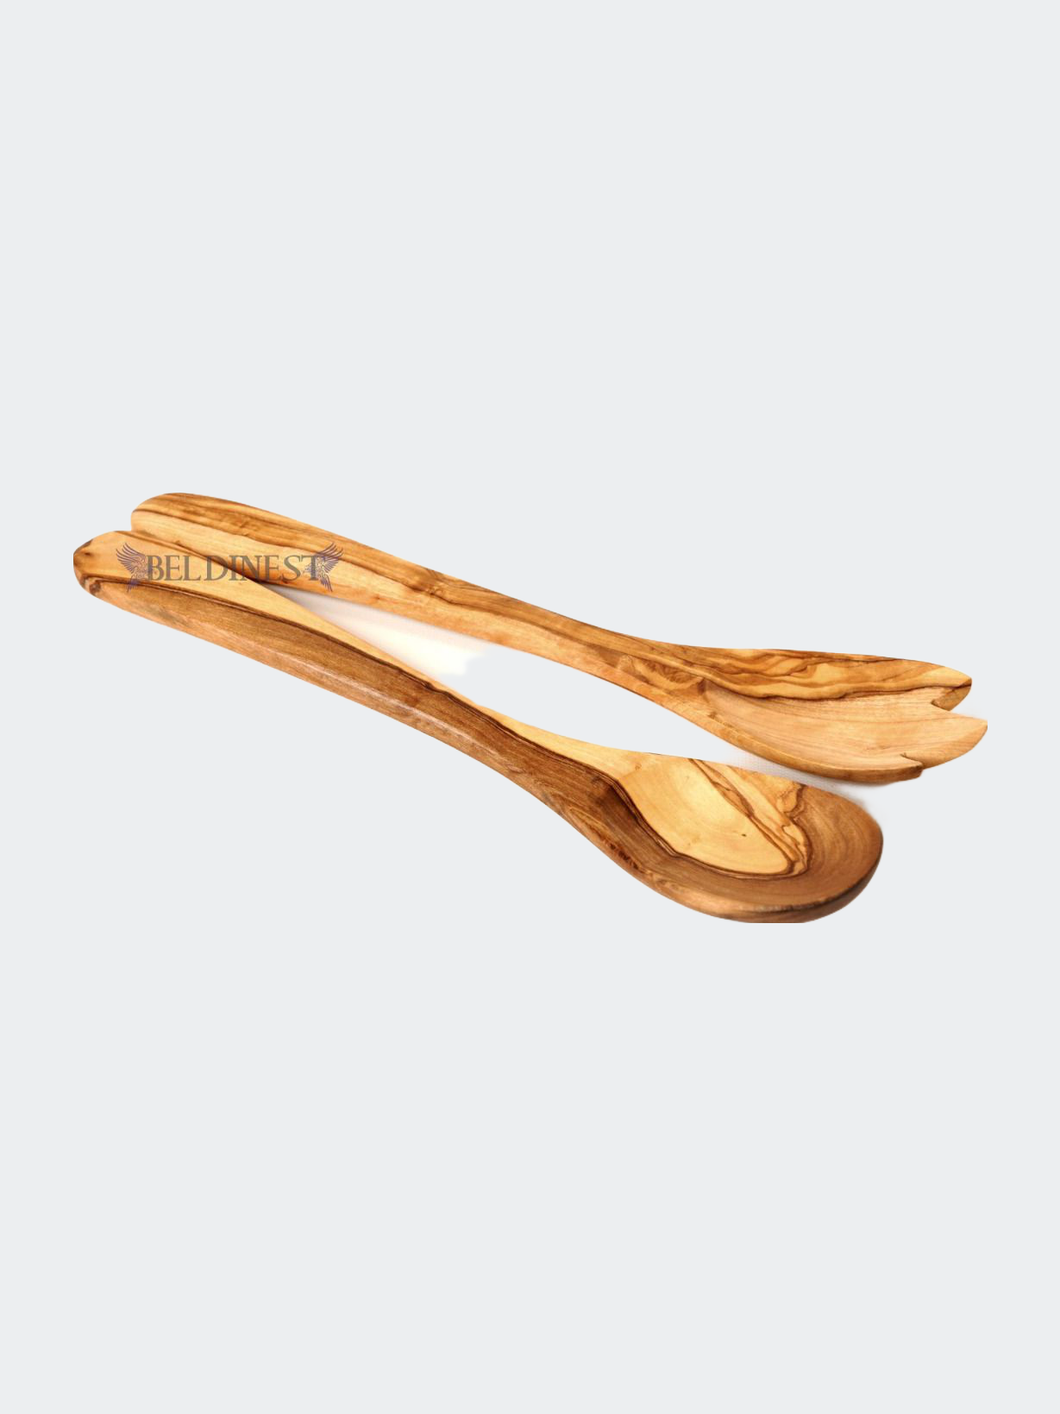 Wooden Salad Servers- Olive Wood Spoon and Spork